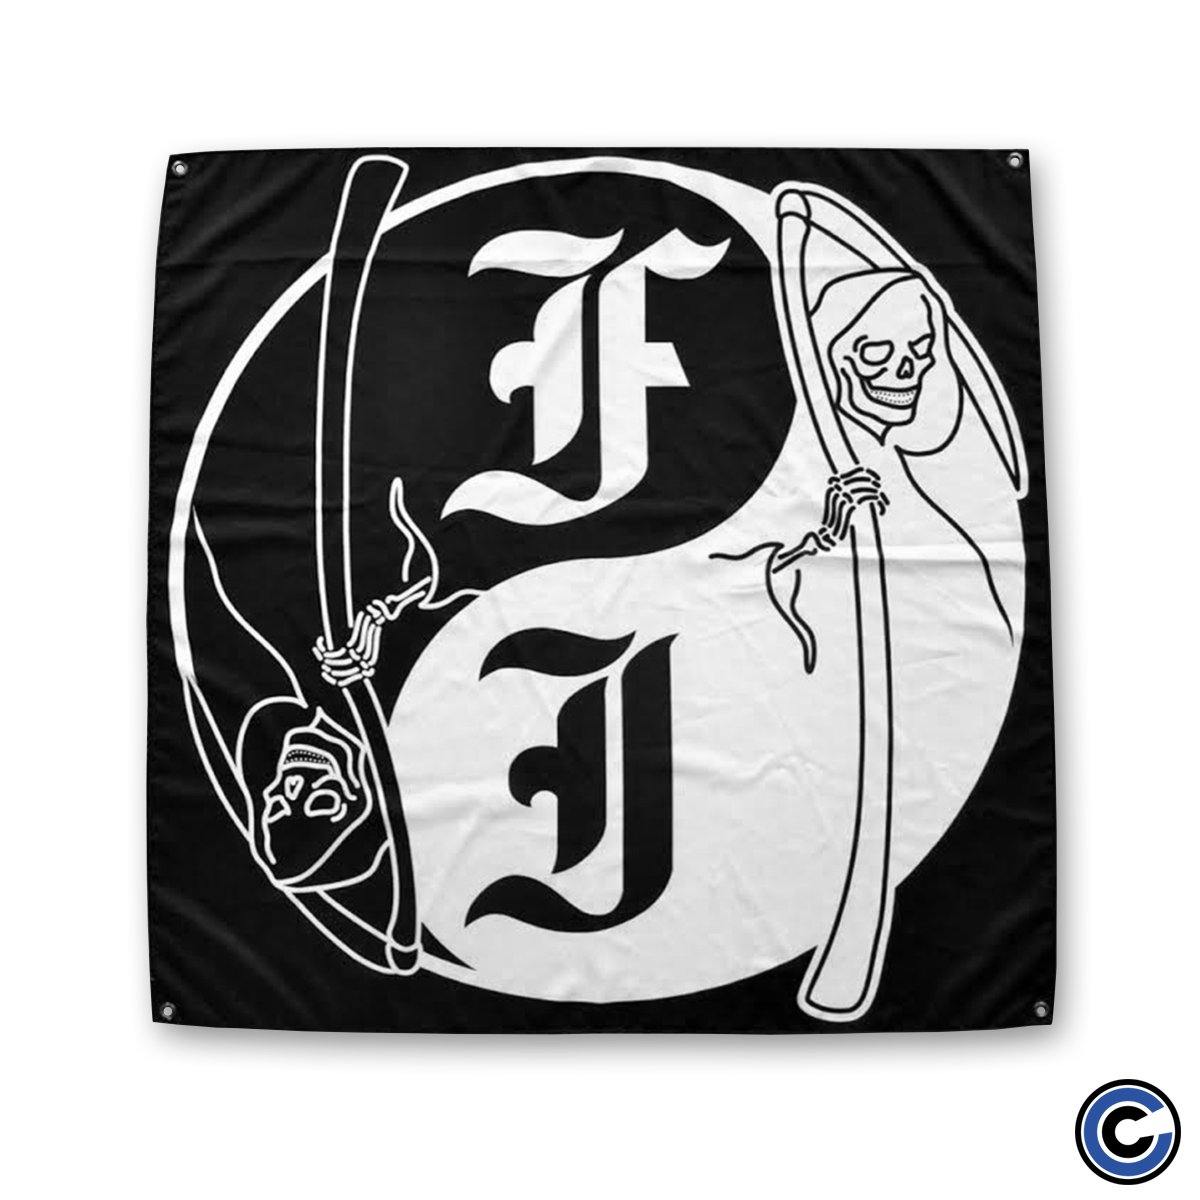 Buy – Fire & Ice "Reaper" Flag – Band & Music Merch – Cold Cuts Merch